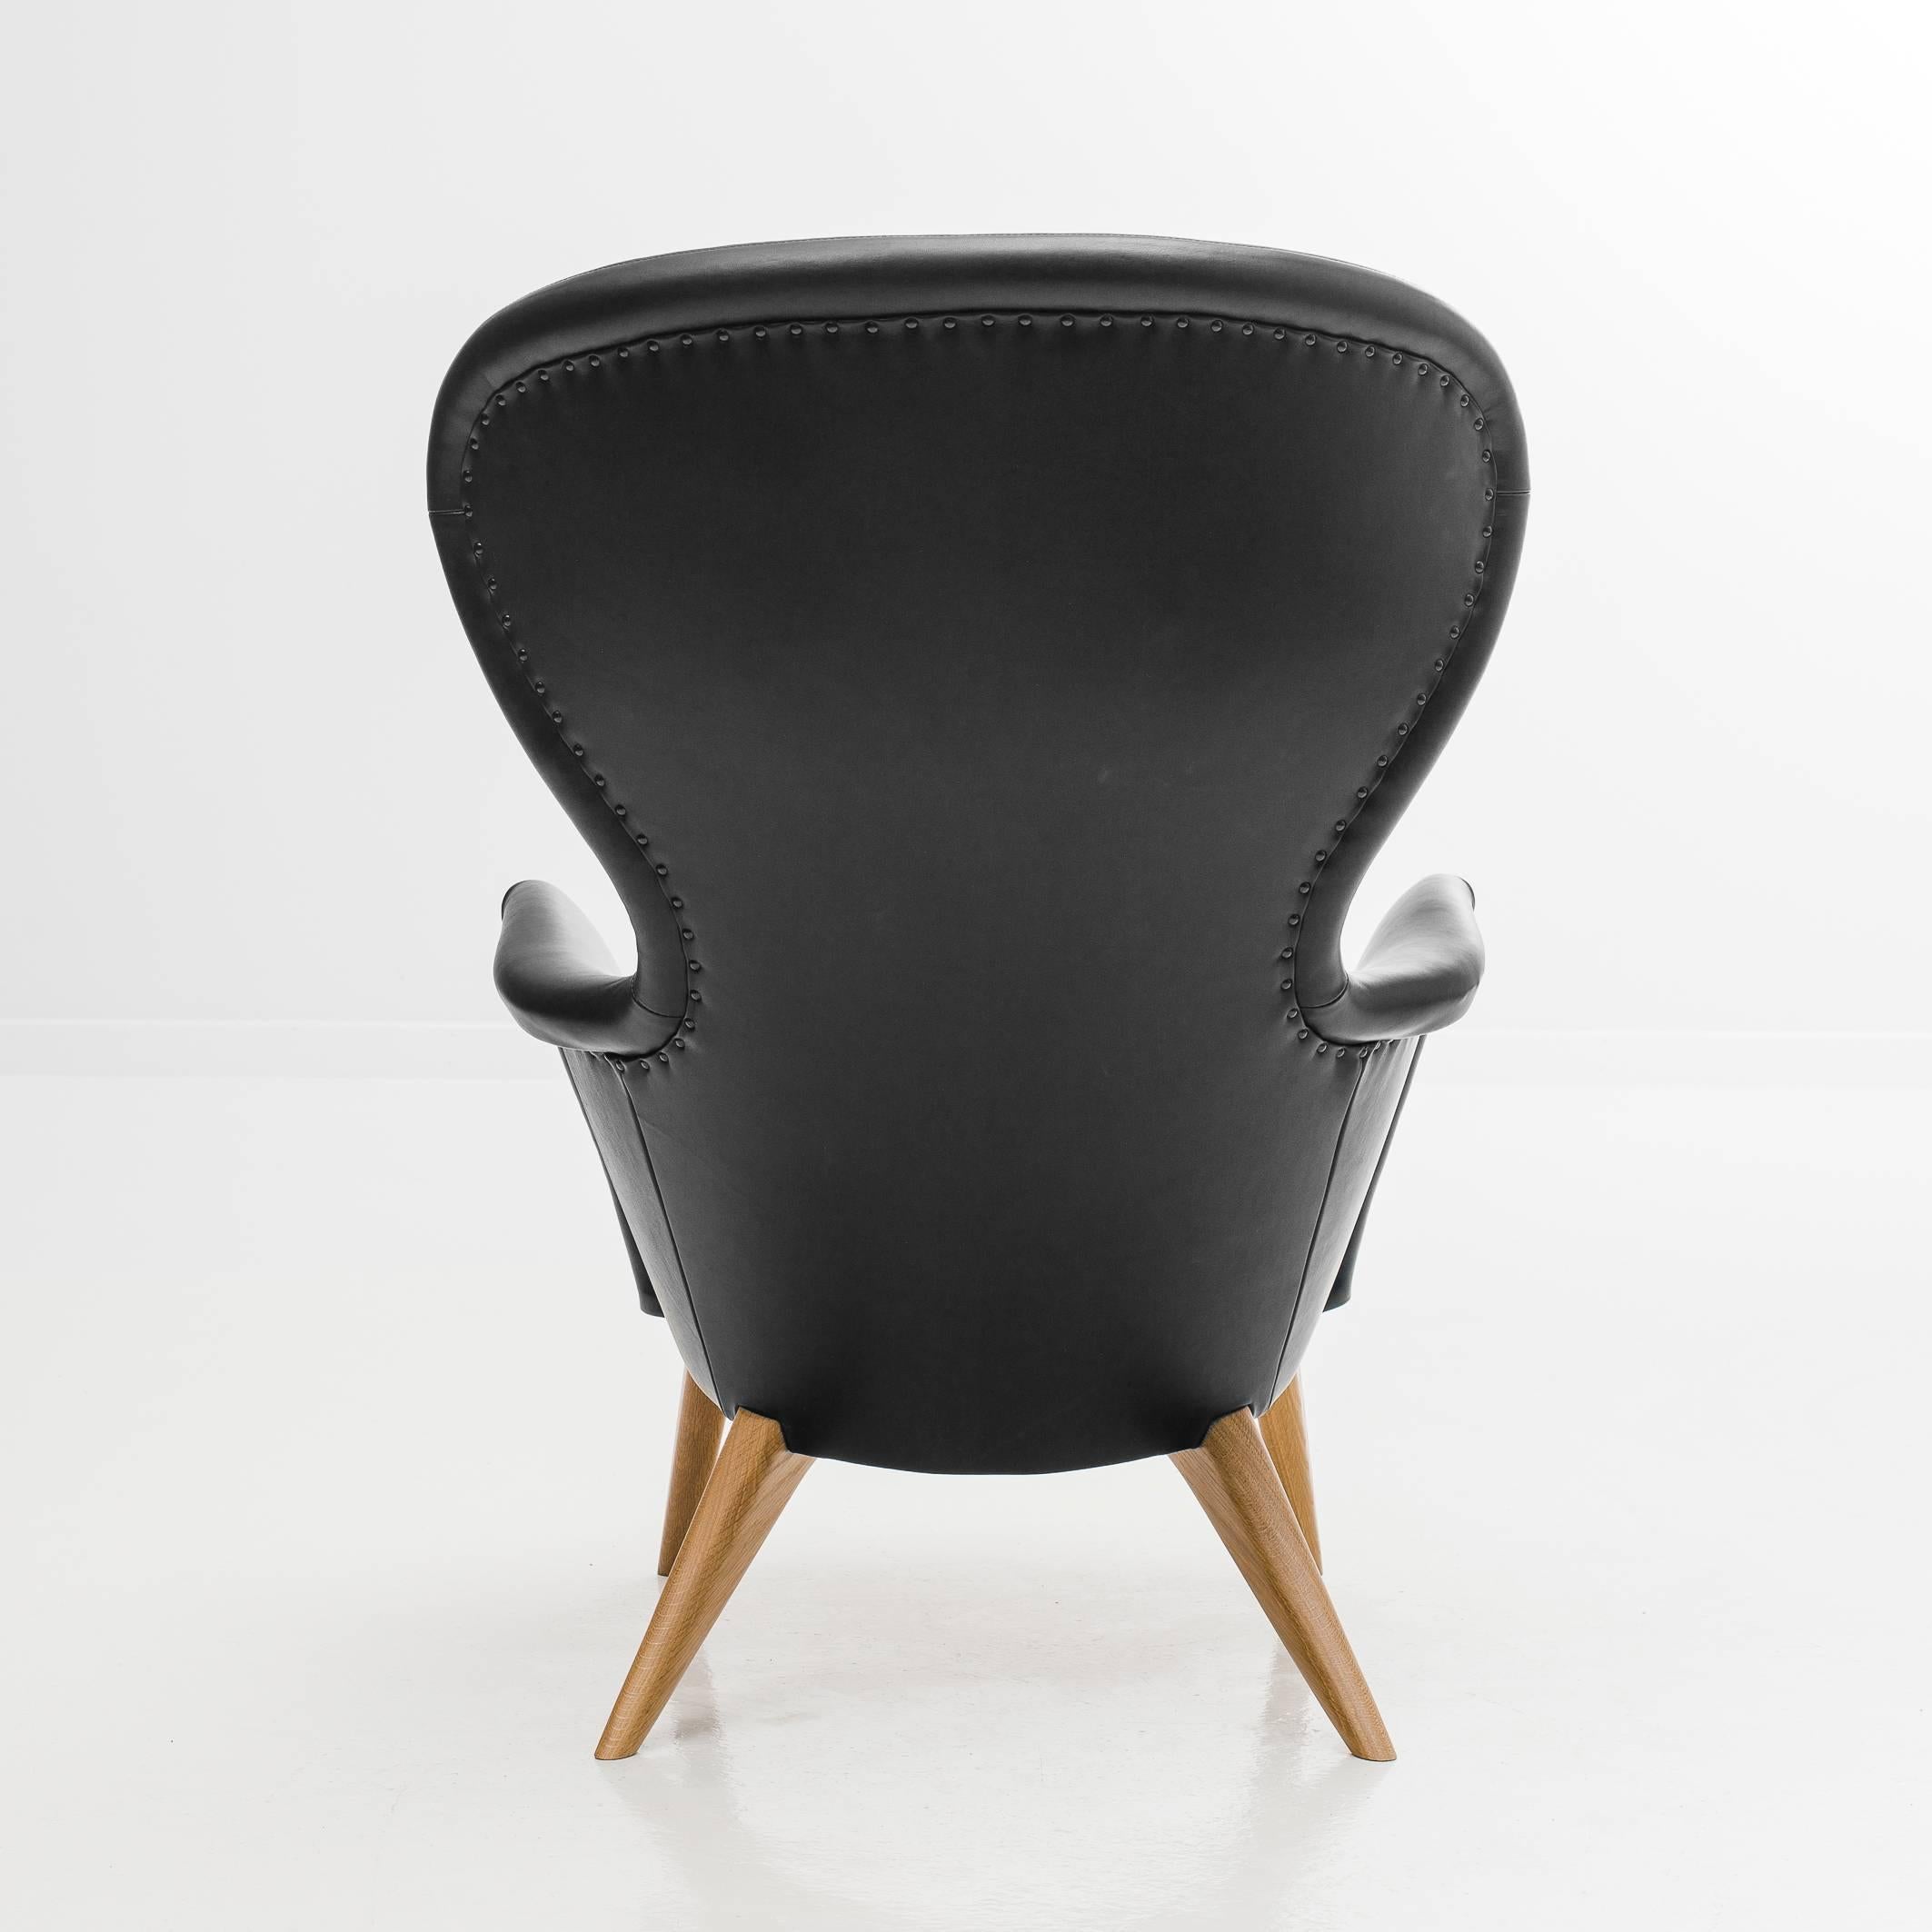 Siesta Lounge Chair in Black Leather Design by Carl Gustav Hiort af Ornäs In Excellent Condition For Sale In Hollola, FI